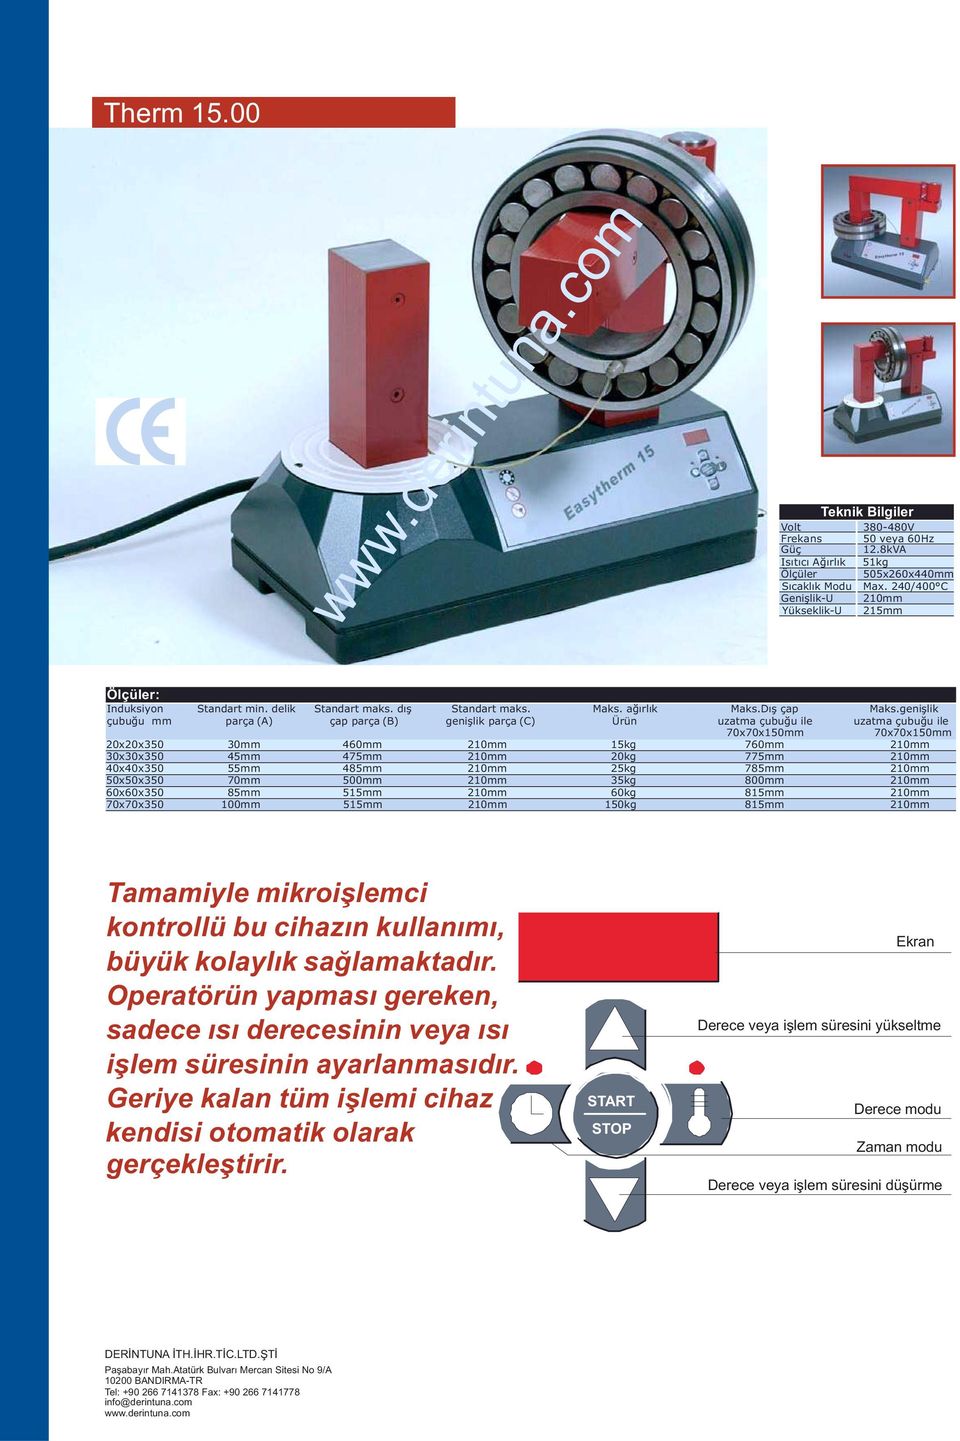 including bearings, typically used in maintenance shops and production areas. Volt 380-480V Güç 12.